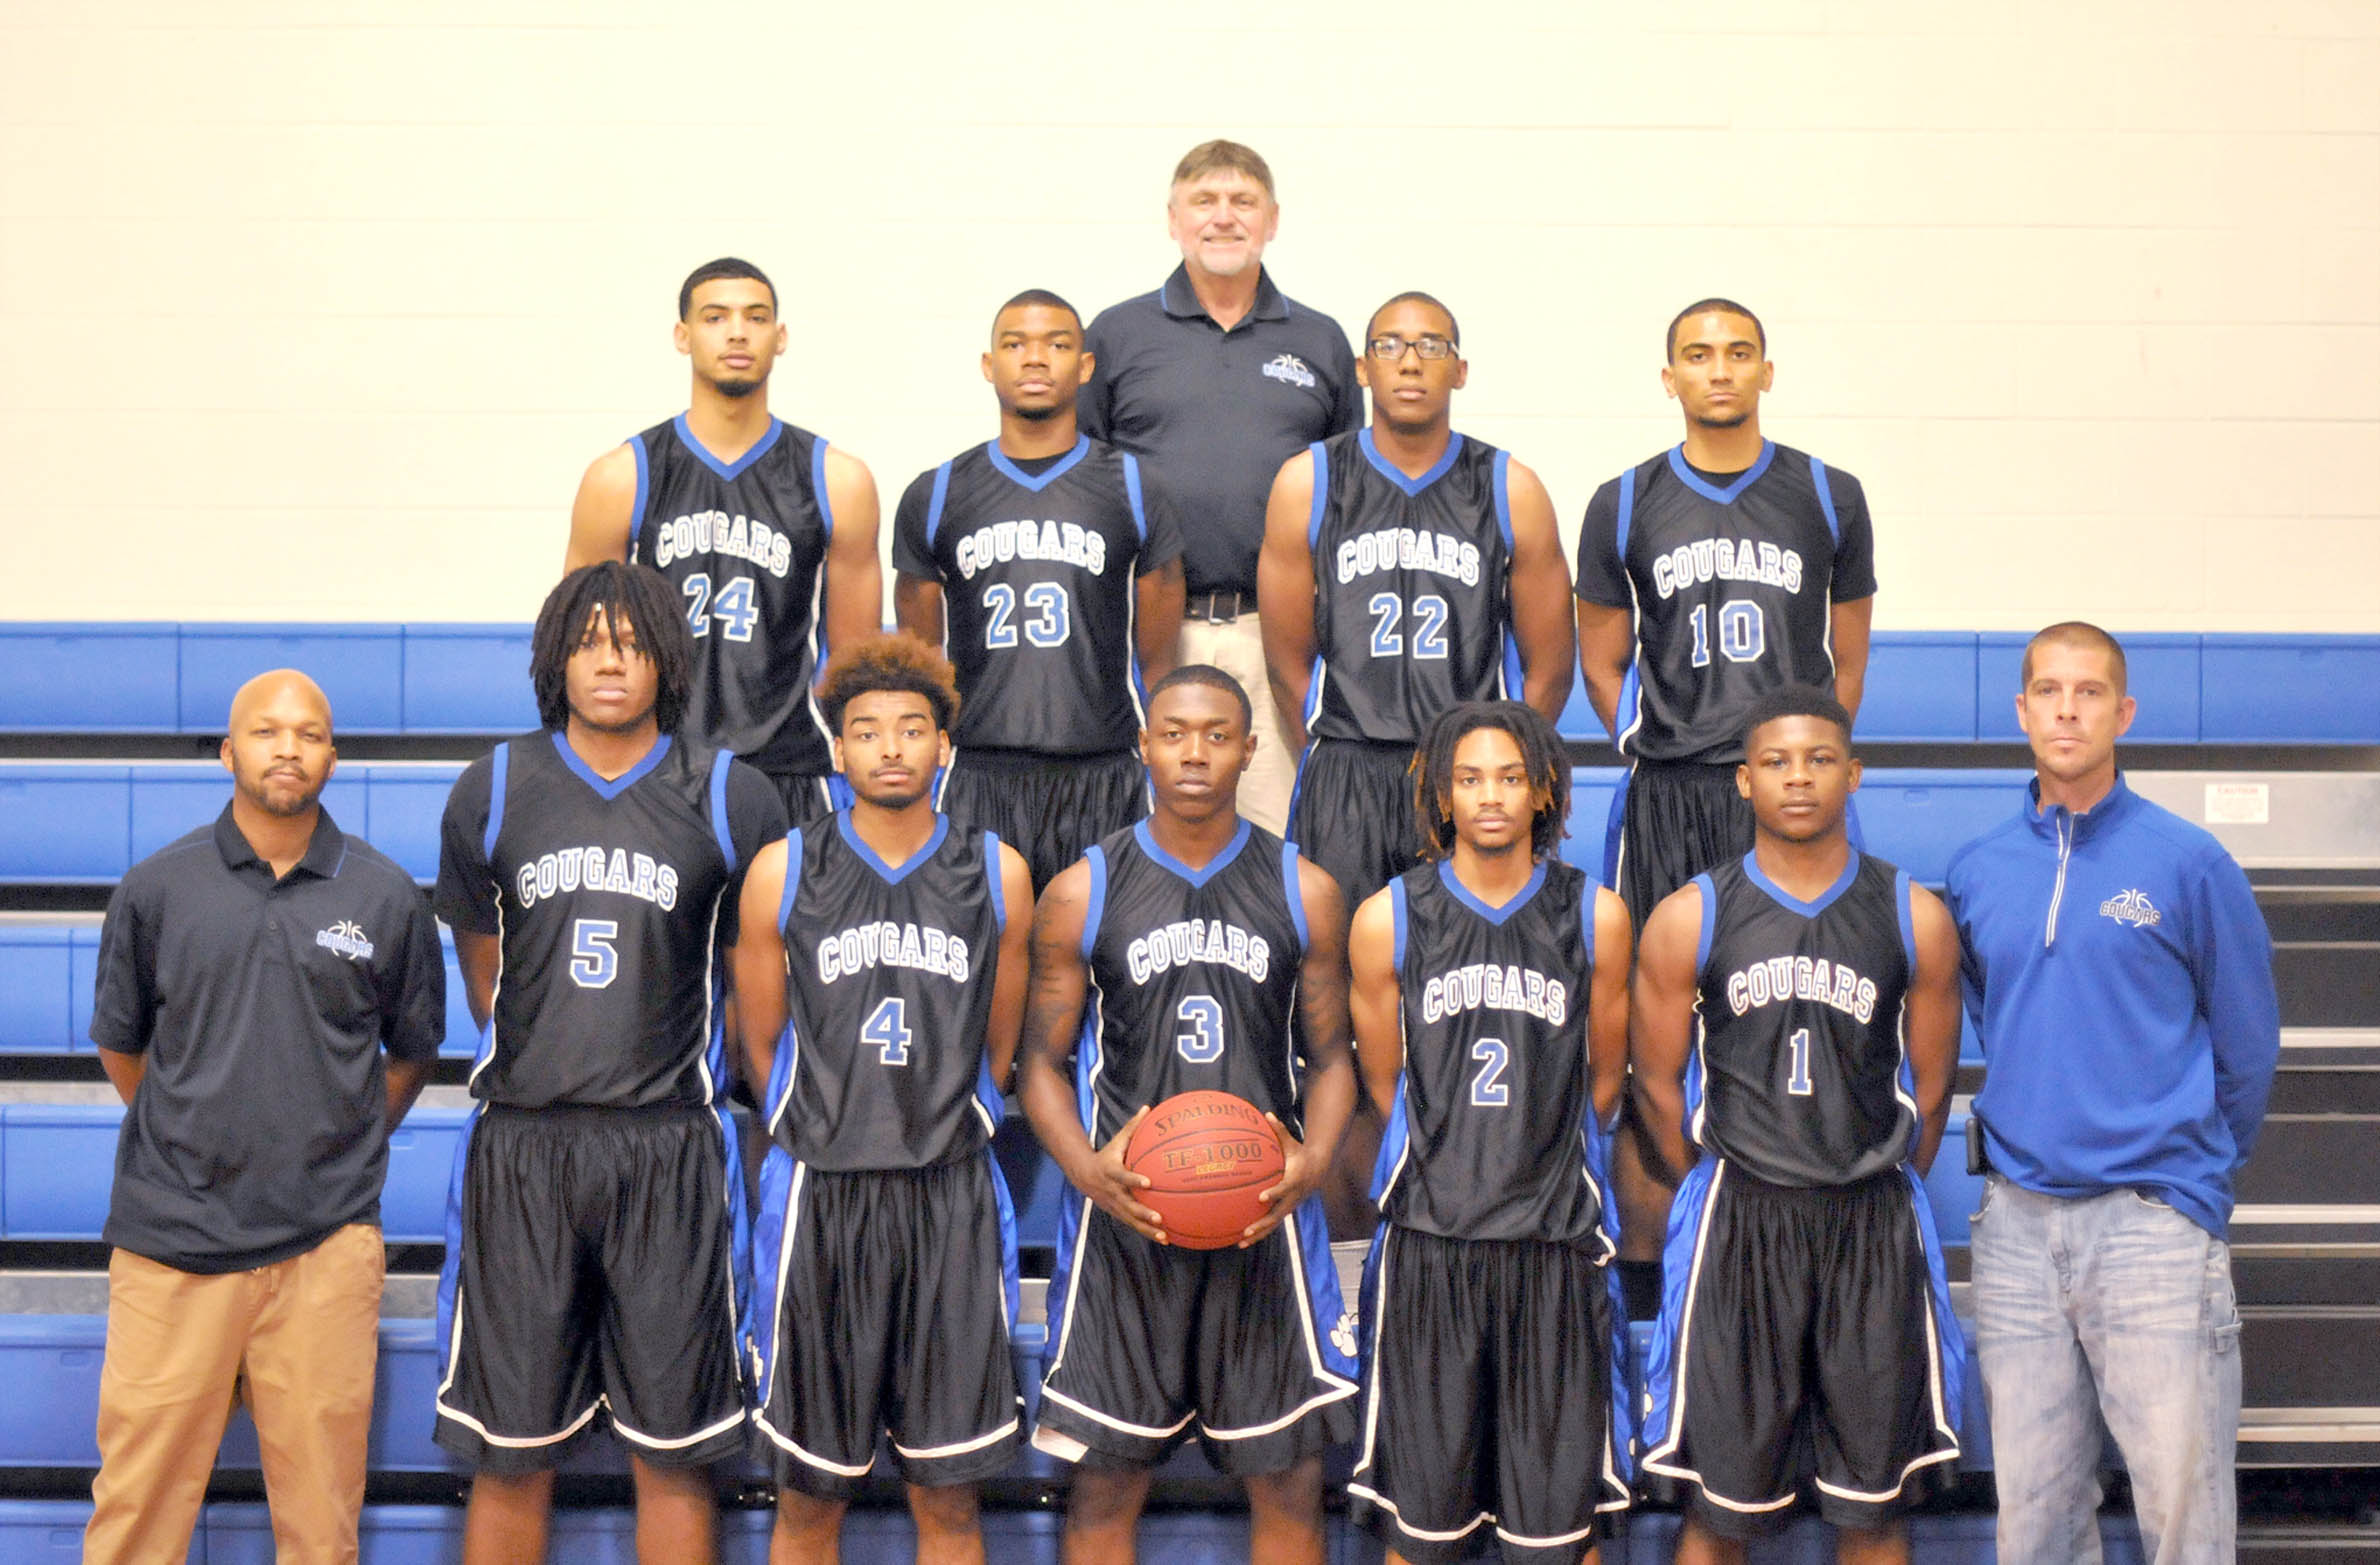 All-around athletes will be strength of CCCC men's basketball team